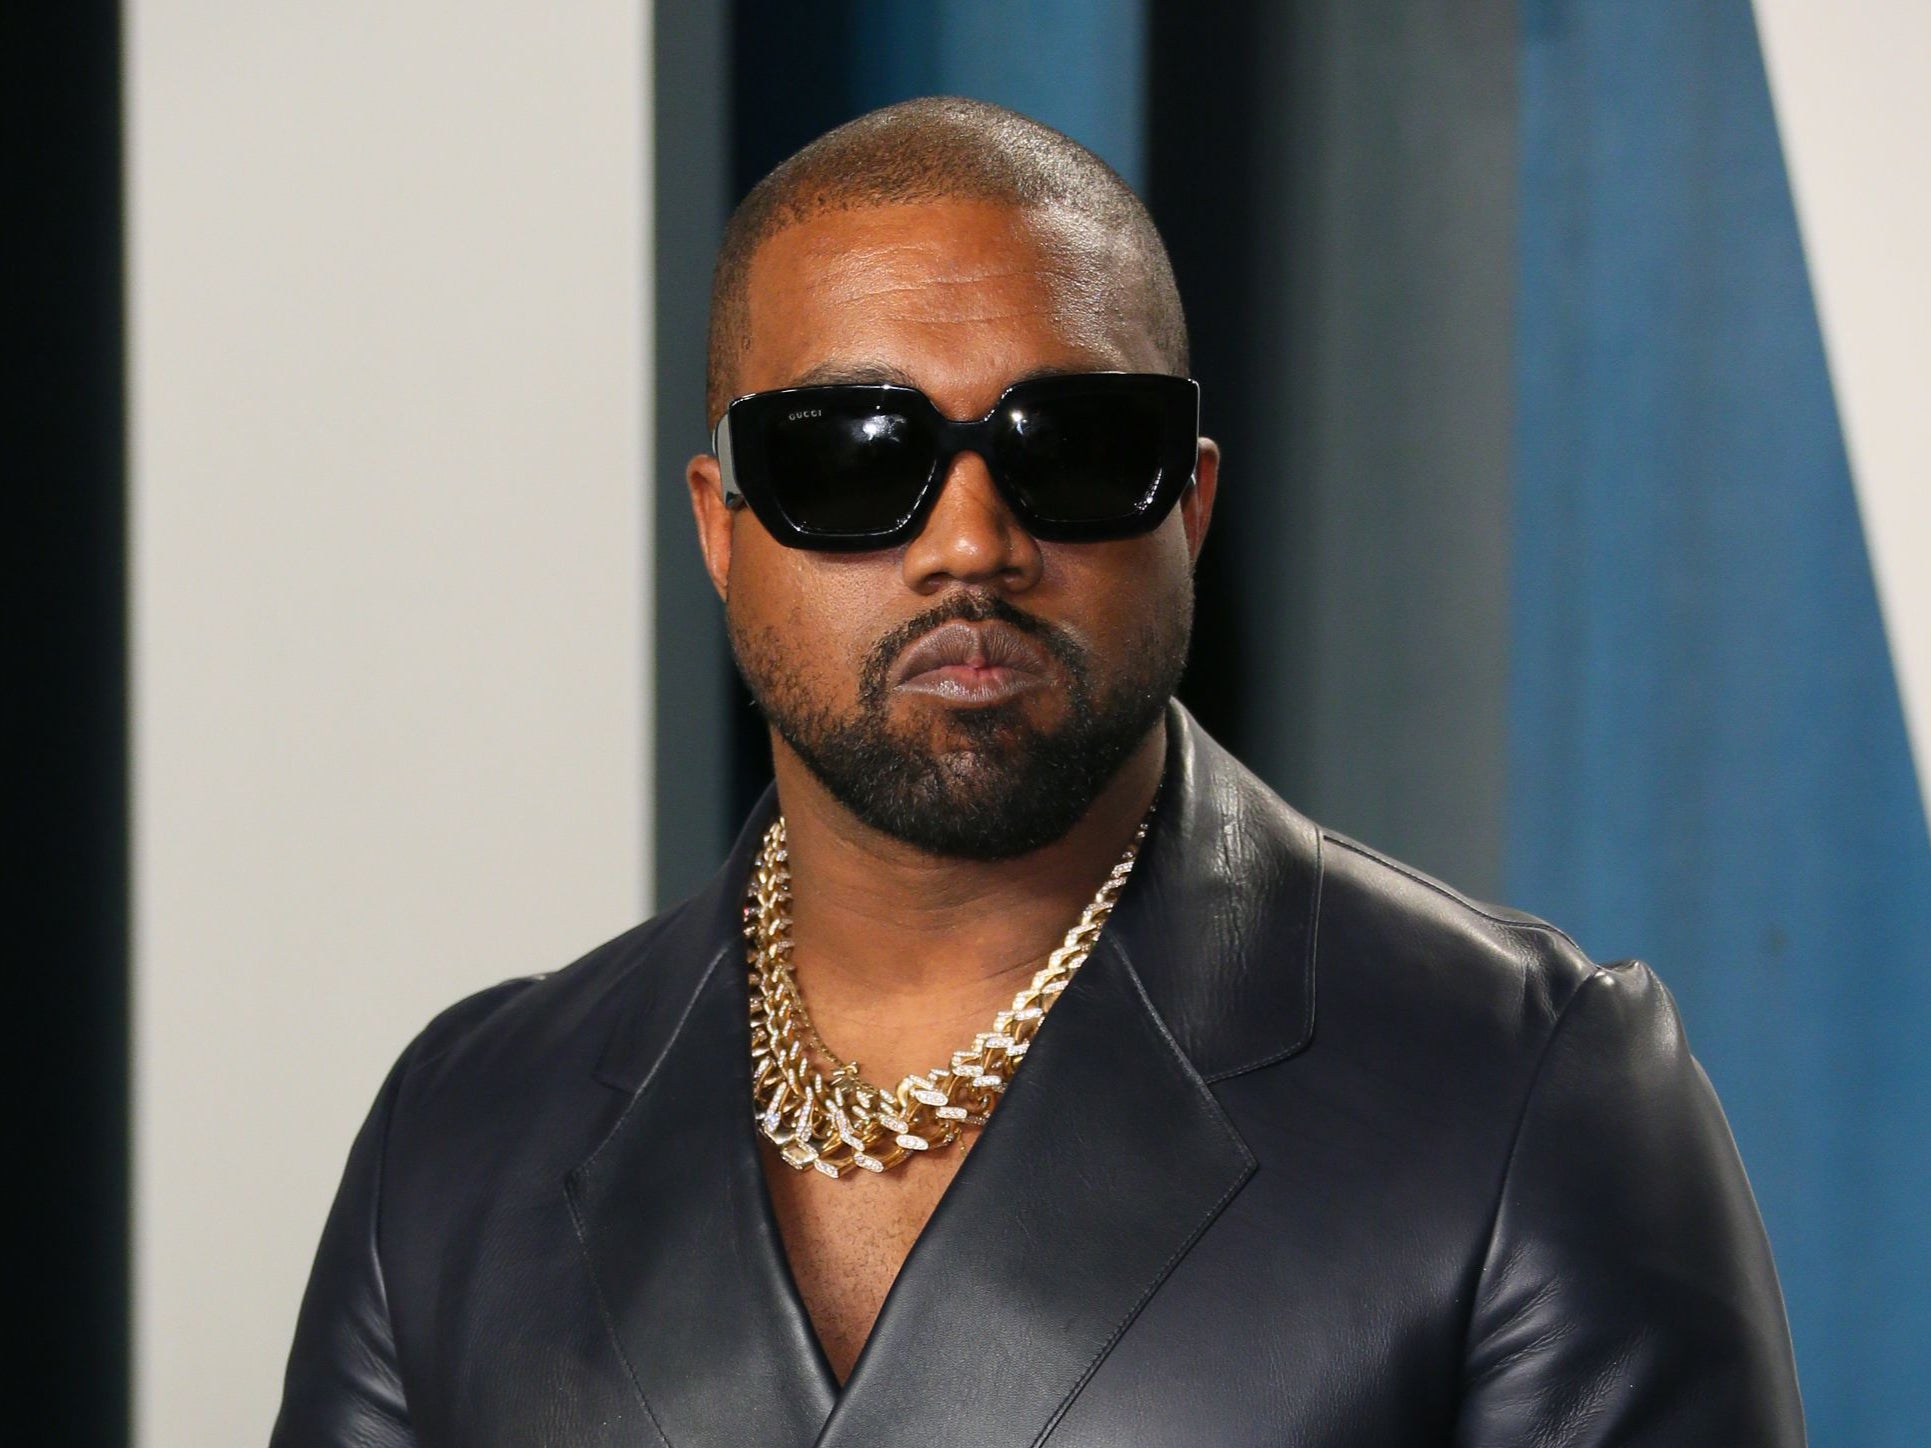 Kanye West has released his new album ‘Vultures'